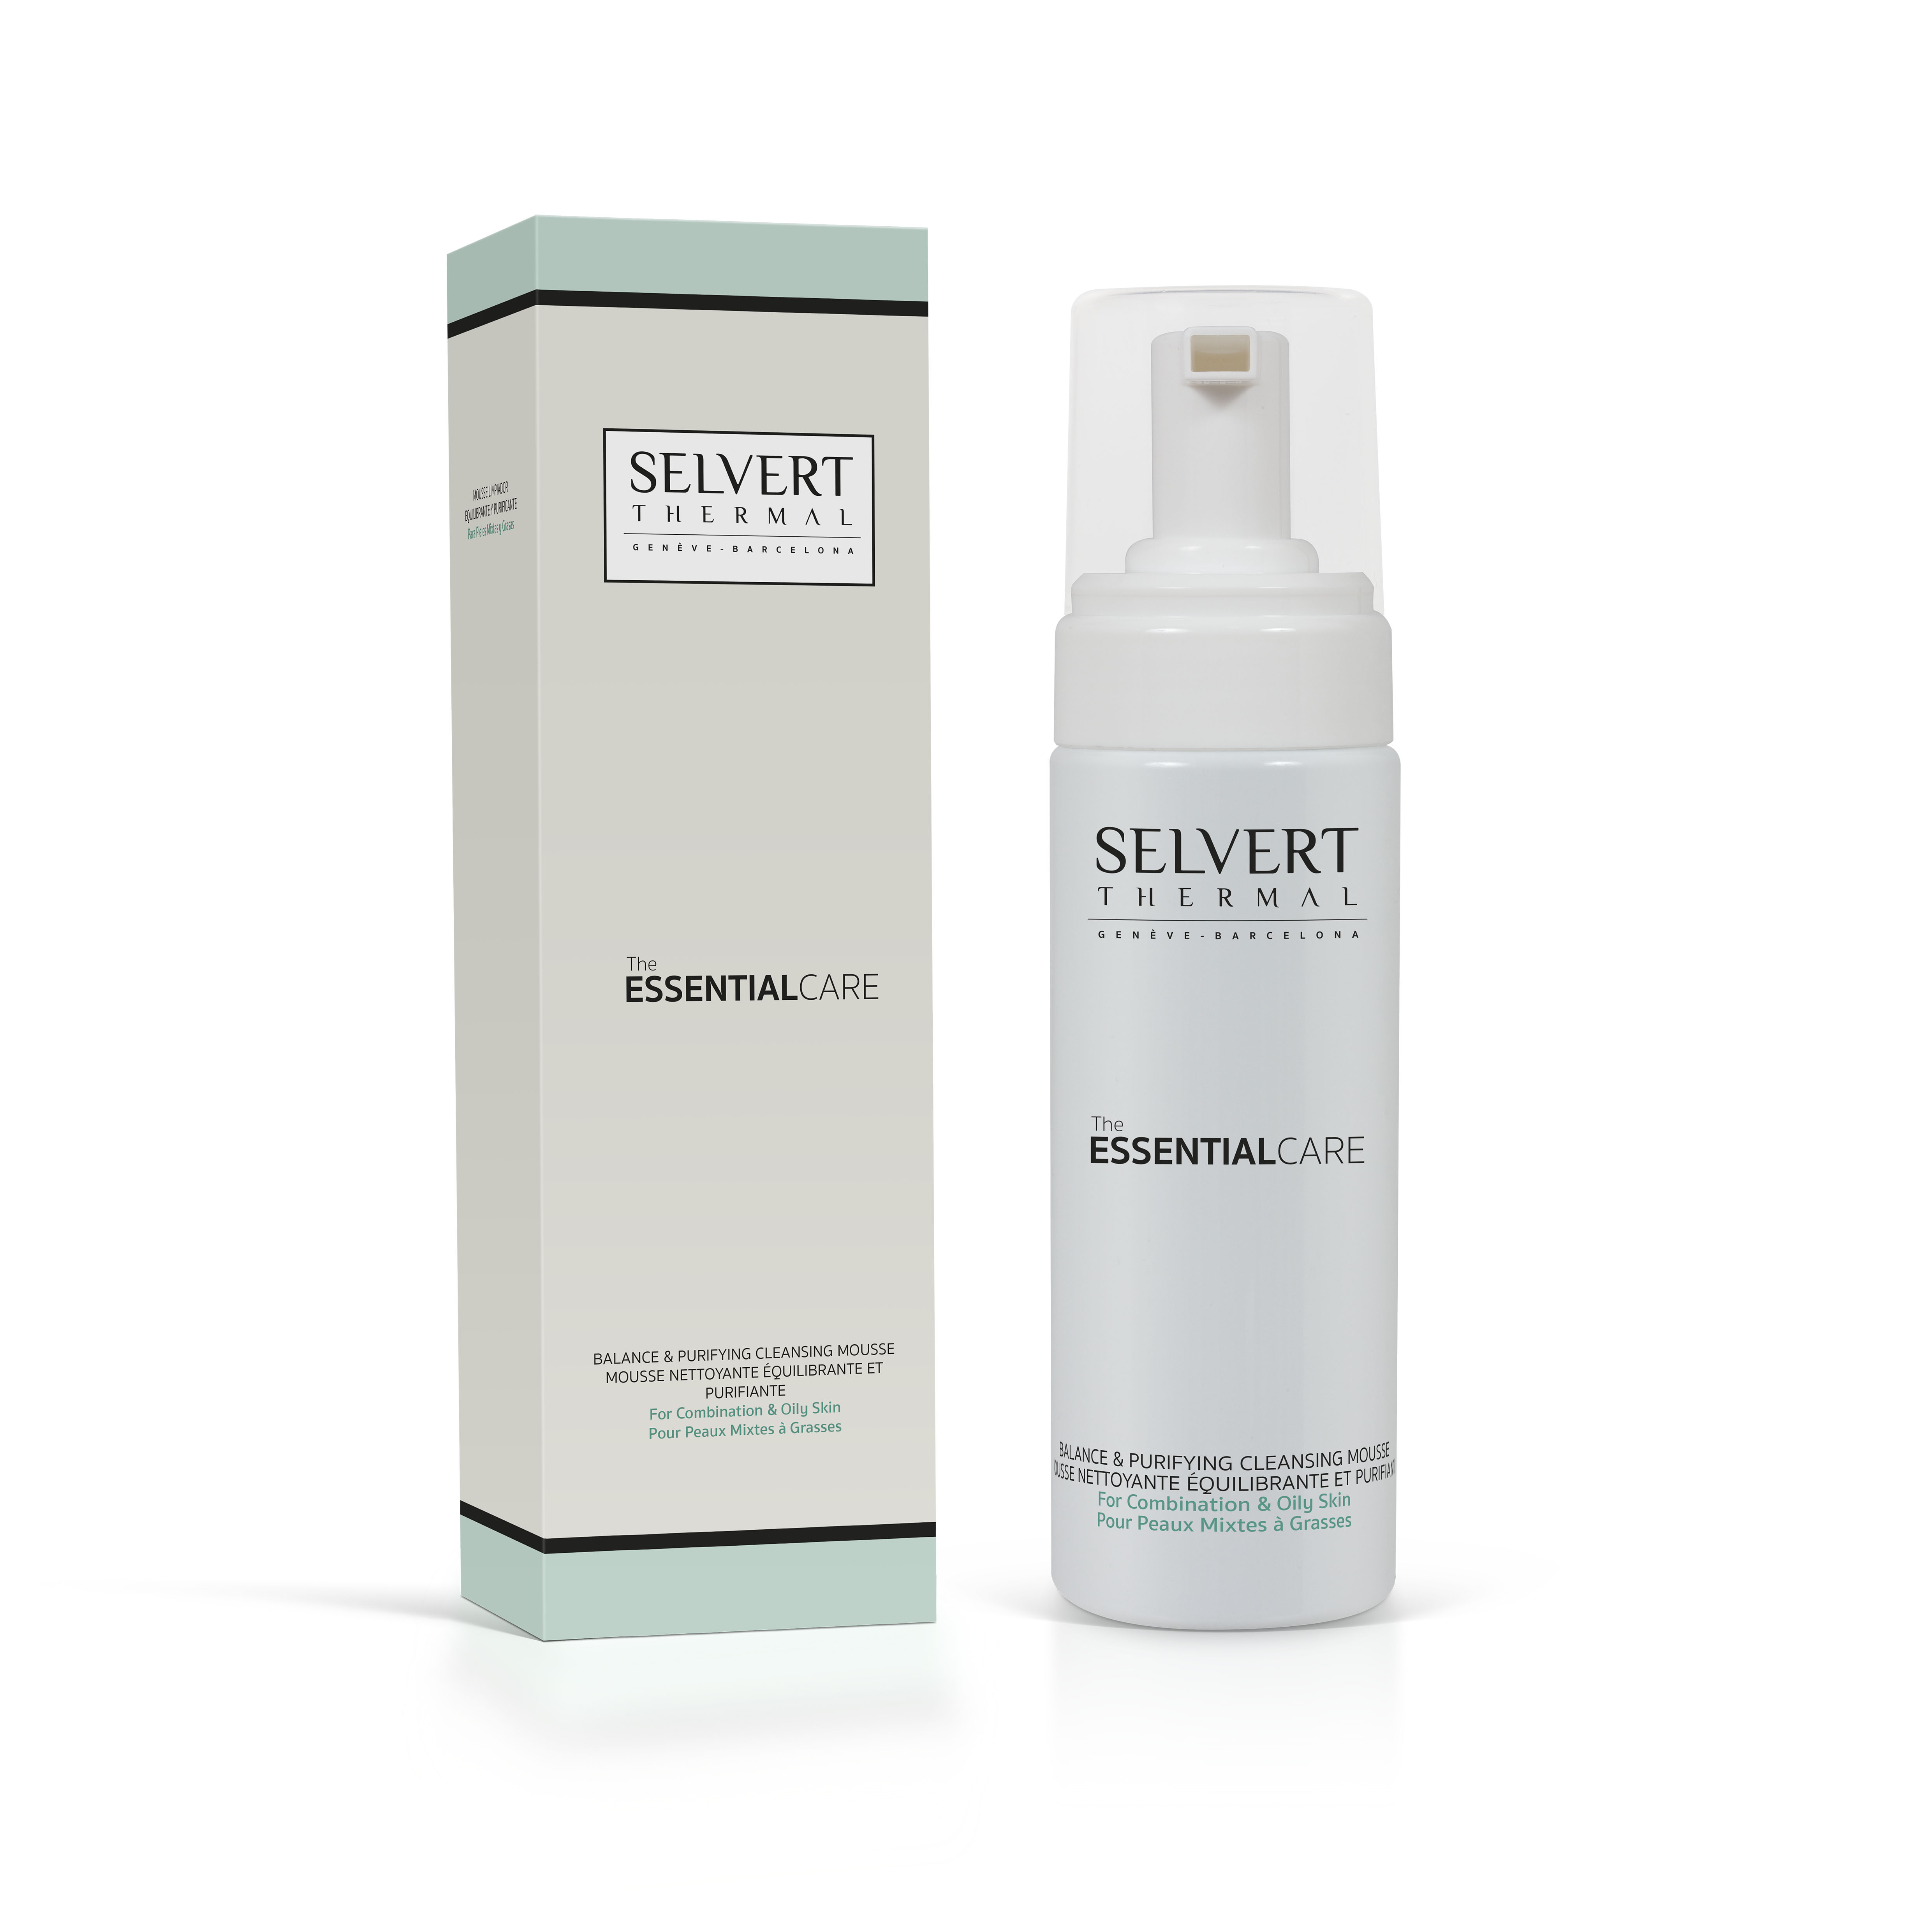 The Essential Care Balance & Purifying Cleansing Mousse